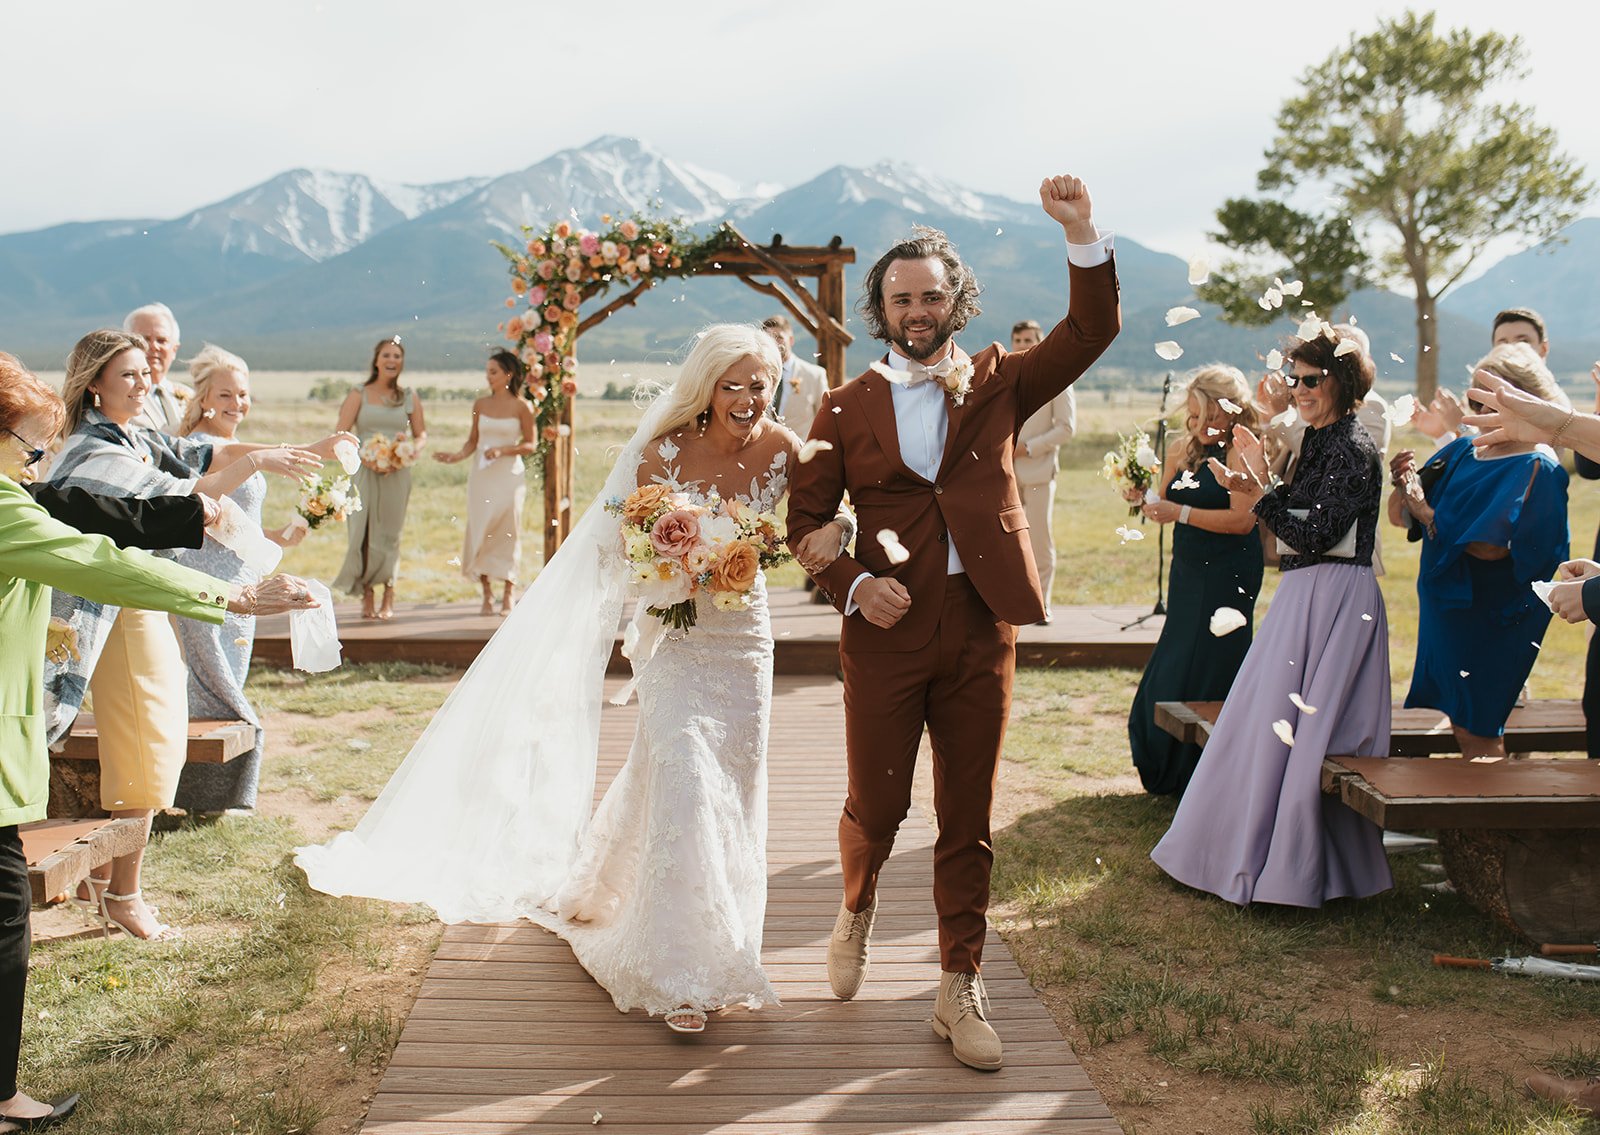 Madeline and Matthew at their Fairytale Wedding at A Mountain Wedding Venue Colorado